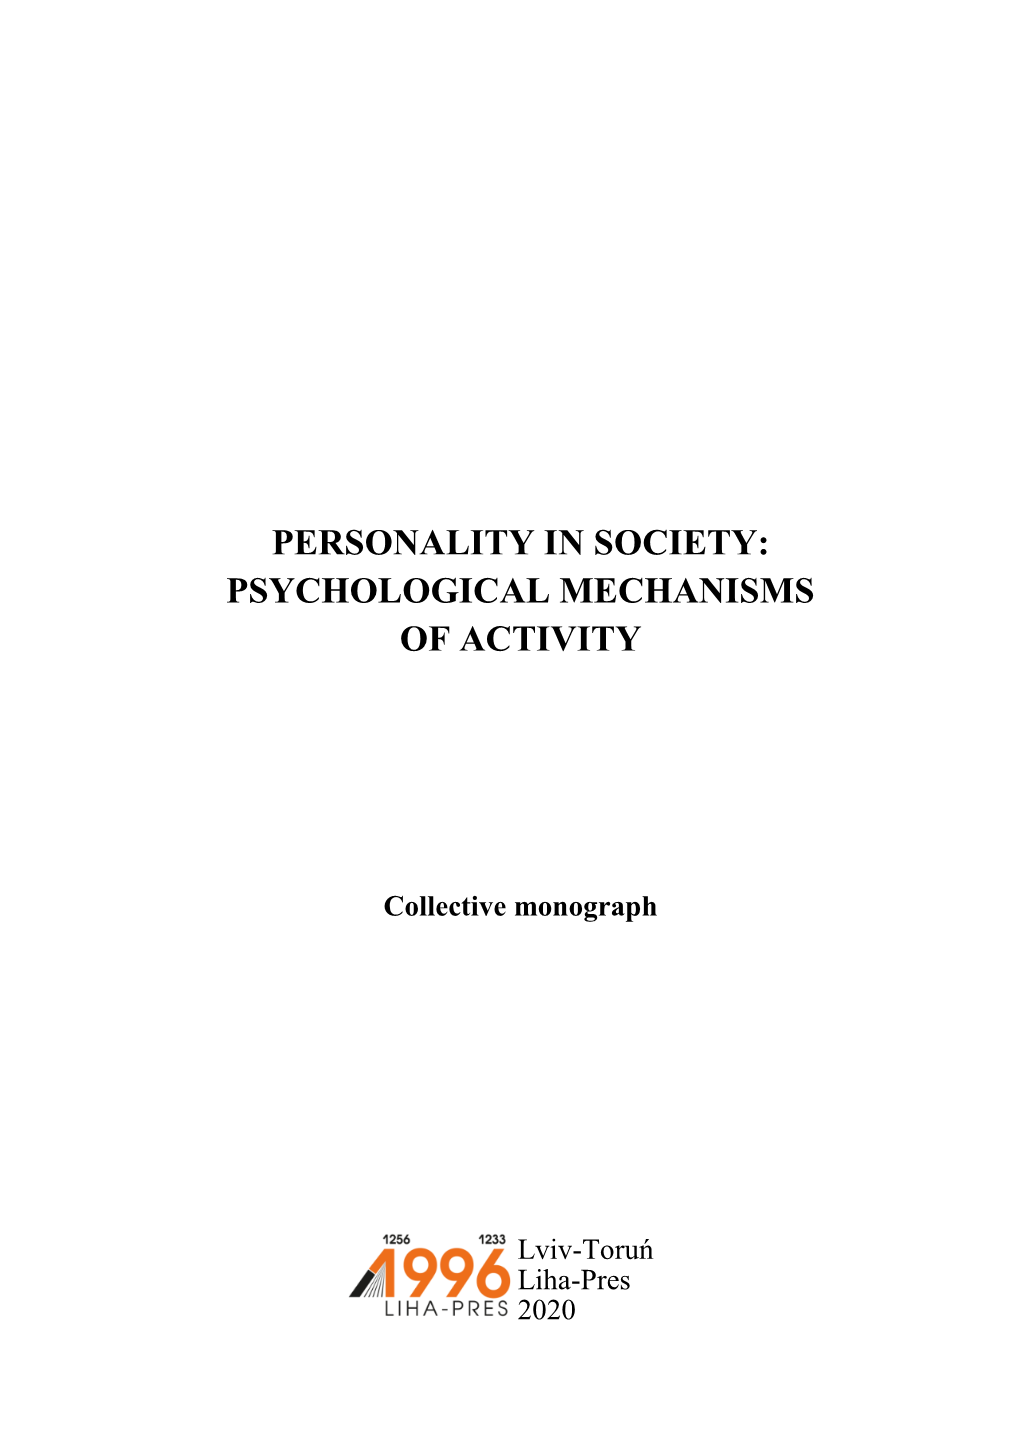 Personality in Society: Psychological Mechanisms of Activity